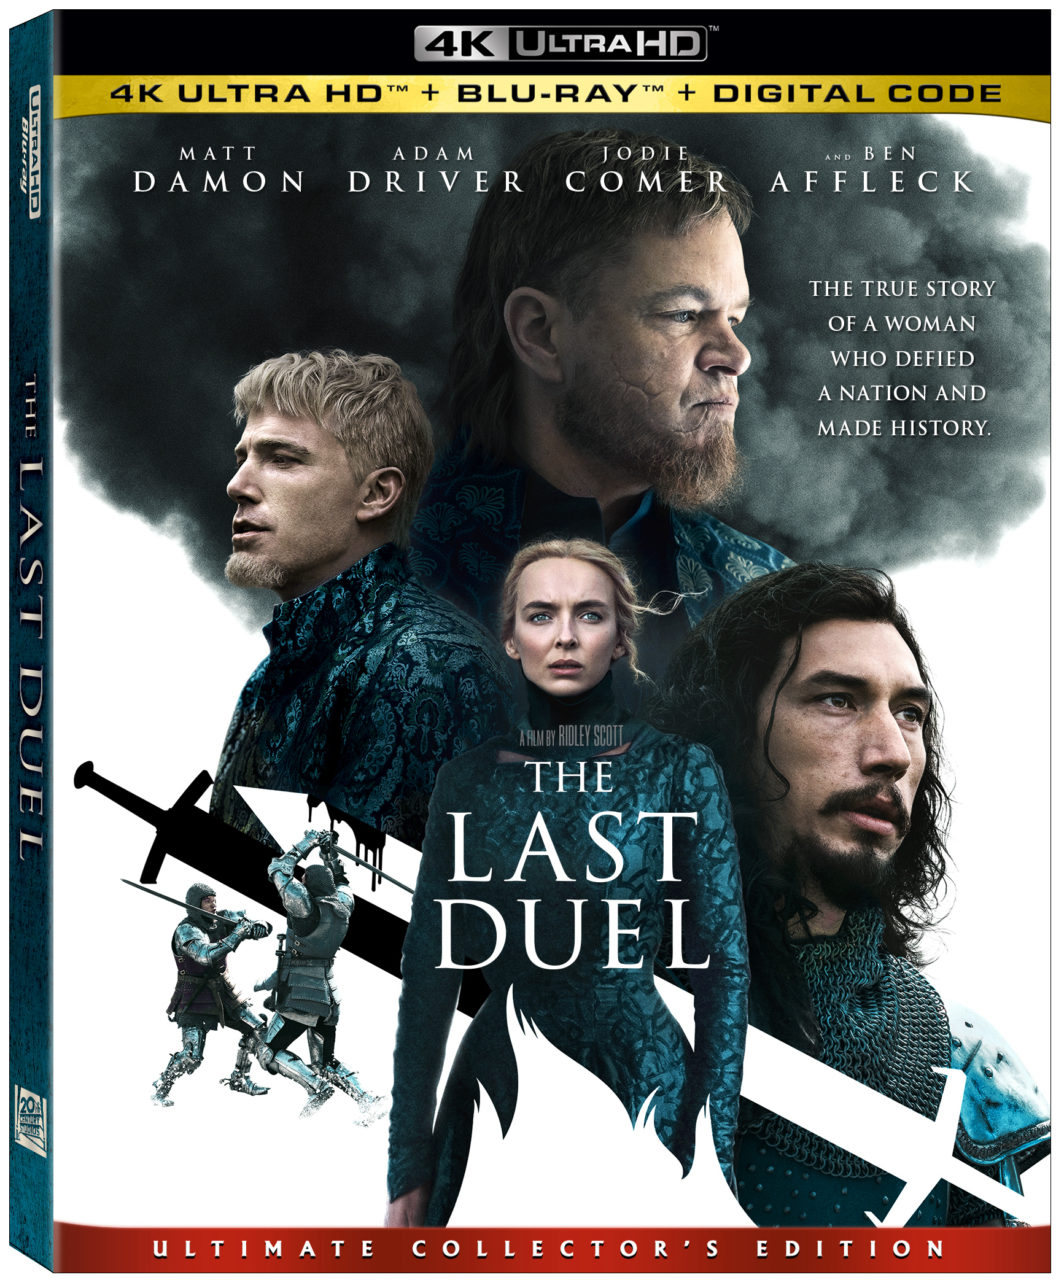 The Last Duel 4K Ultra HD Combo Pack cover (20th Century Studios/Disney Media & Entertainment Distribution)